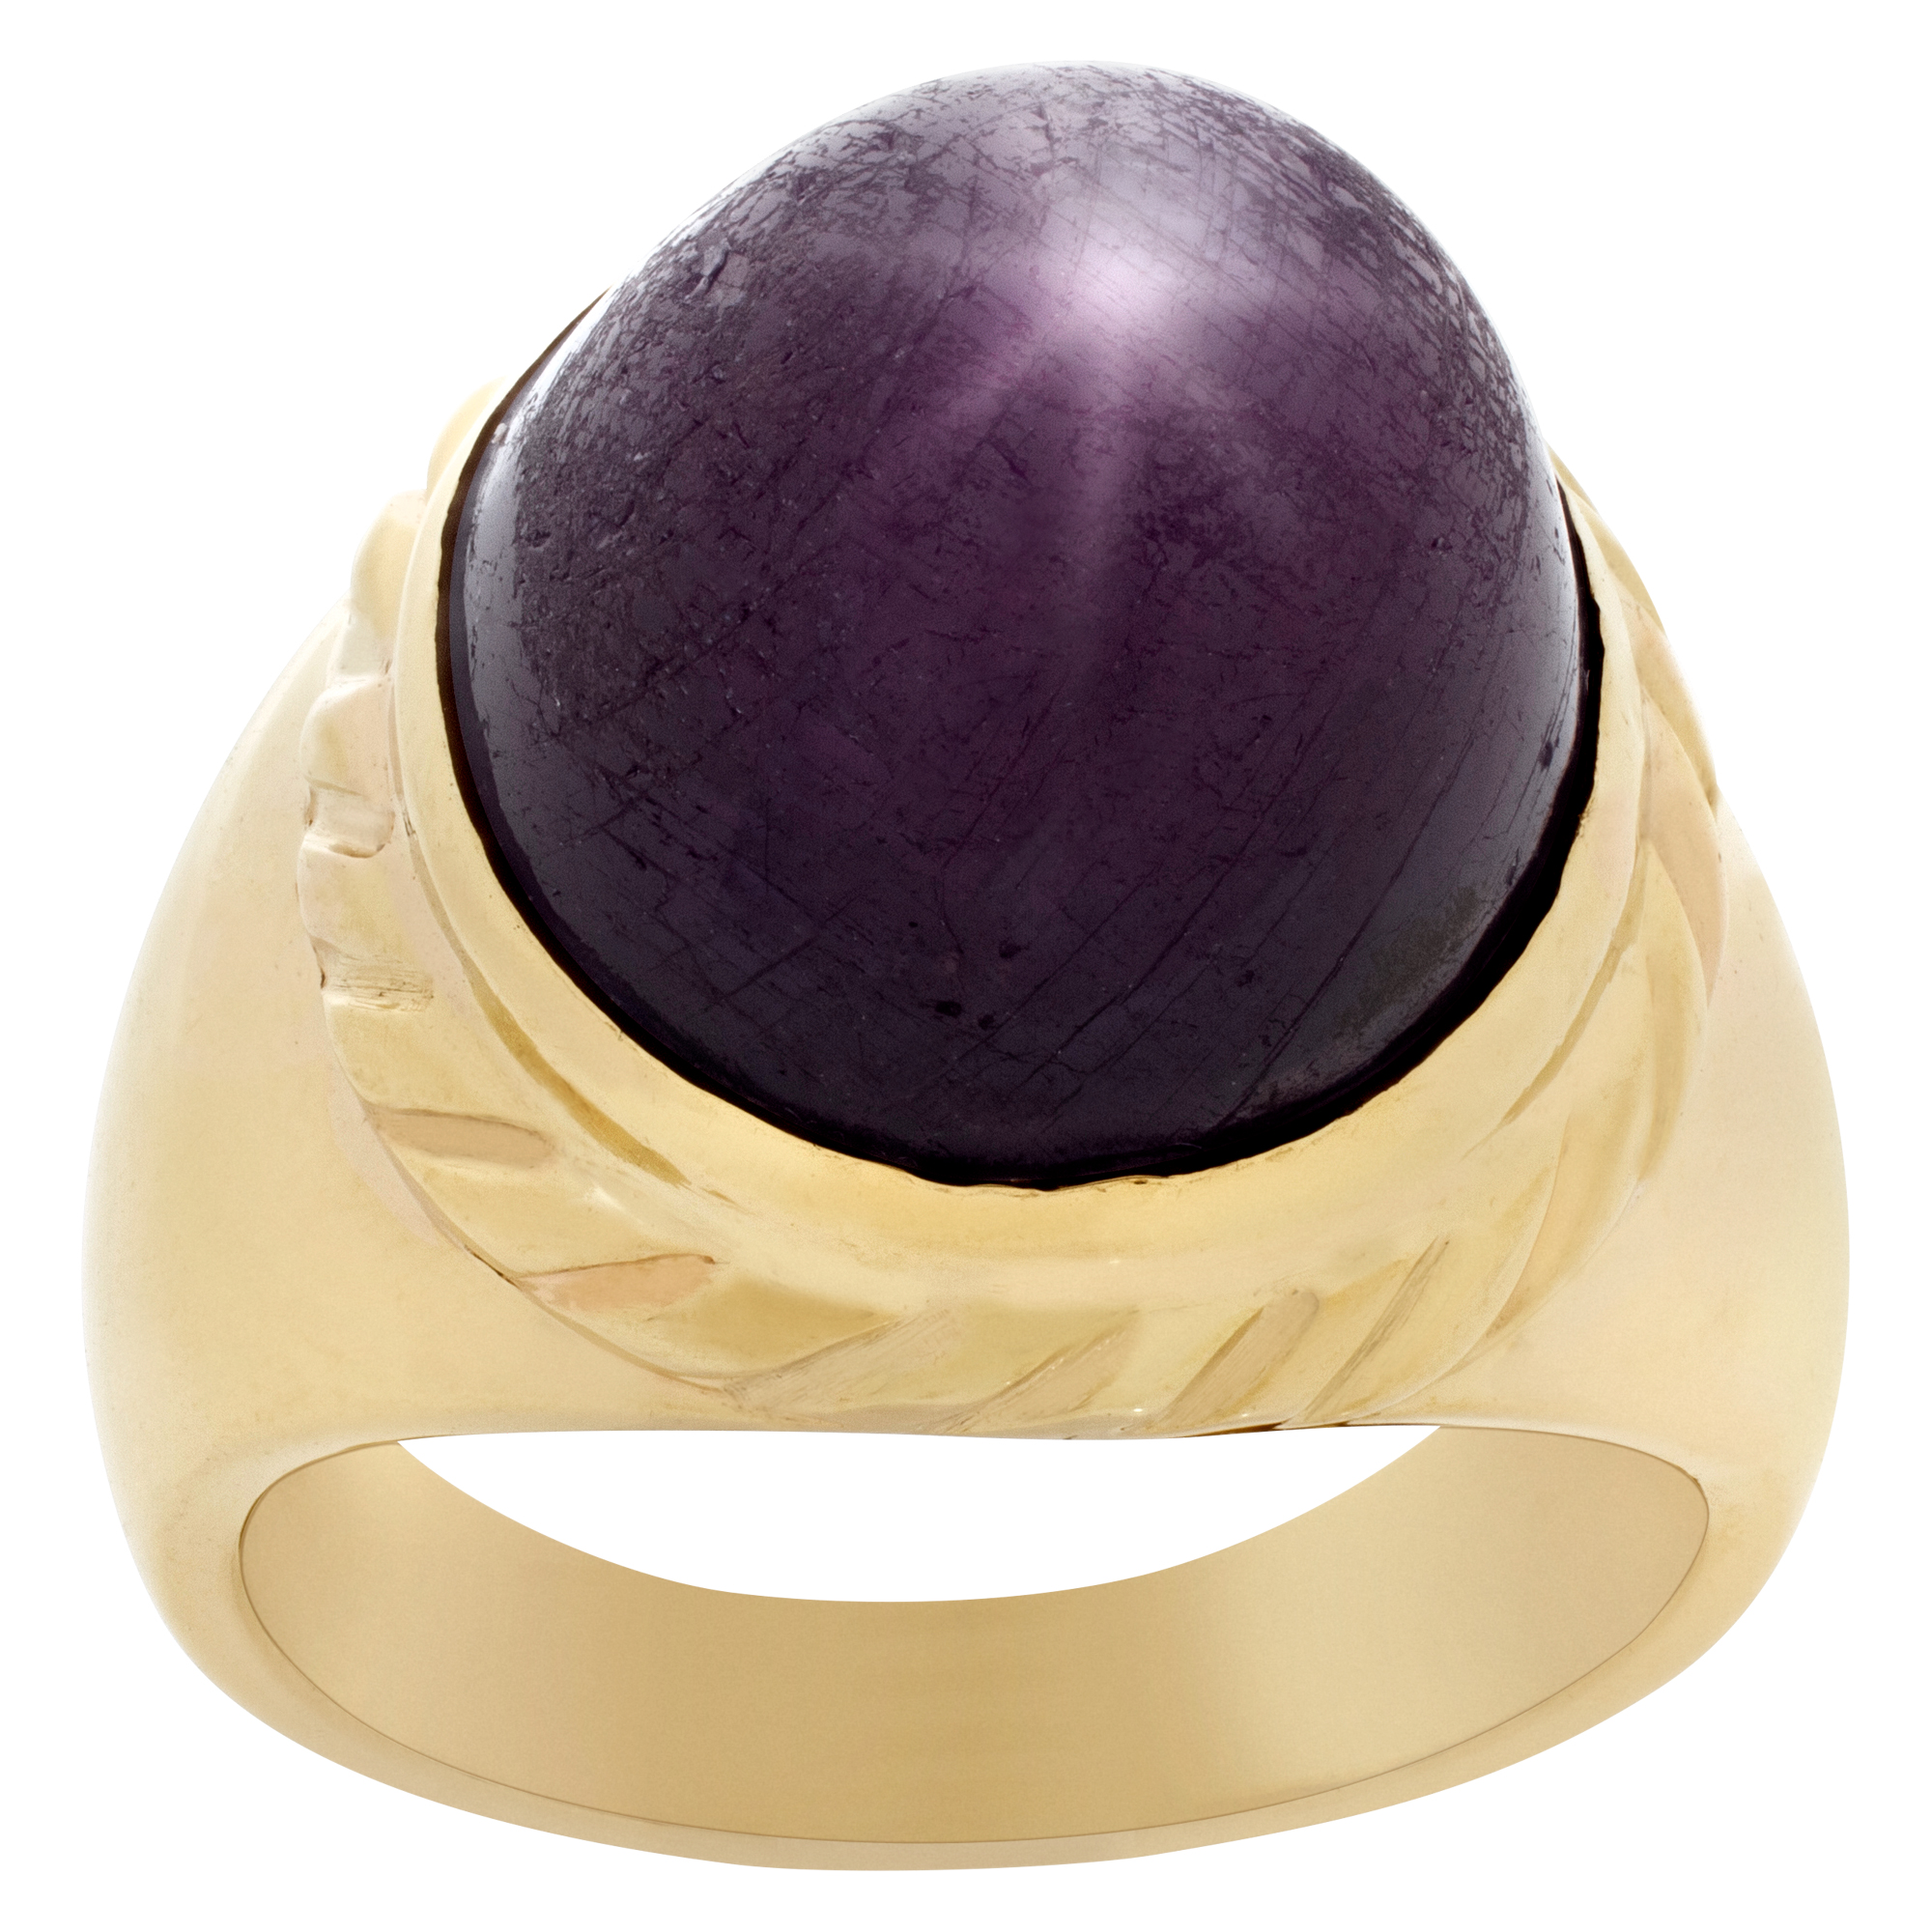 Cabochon star ruby ring in 14k yellow gold, total approx. weight: over 10 carats.